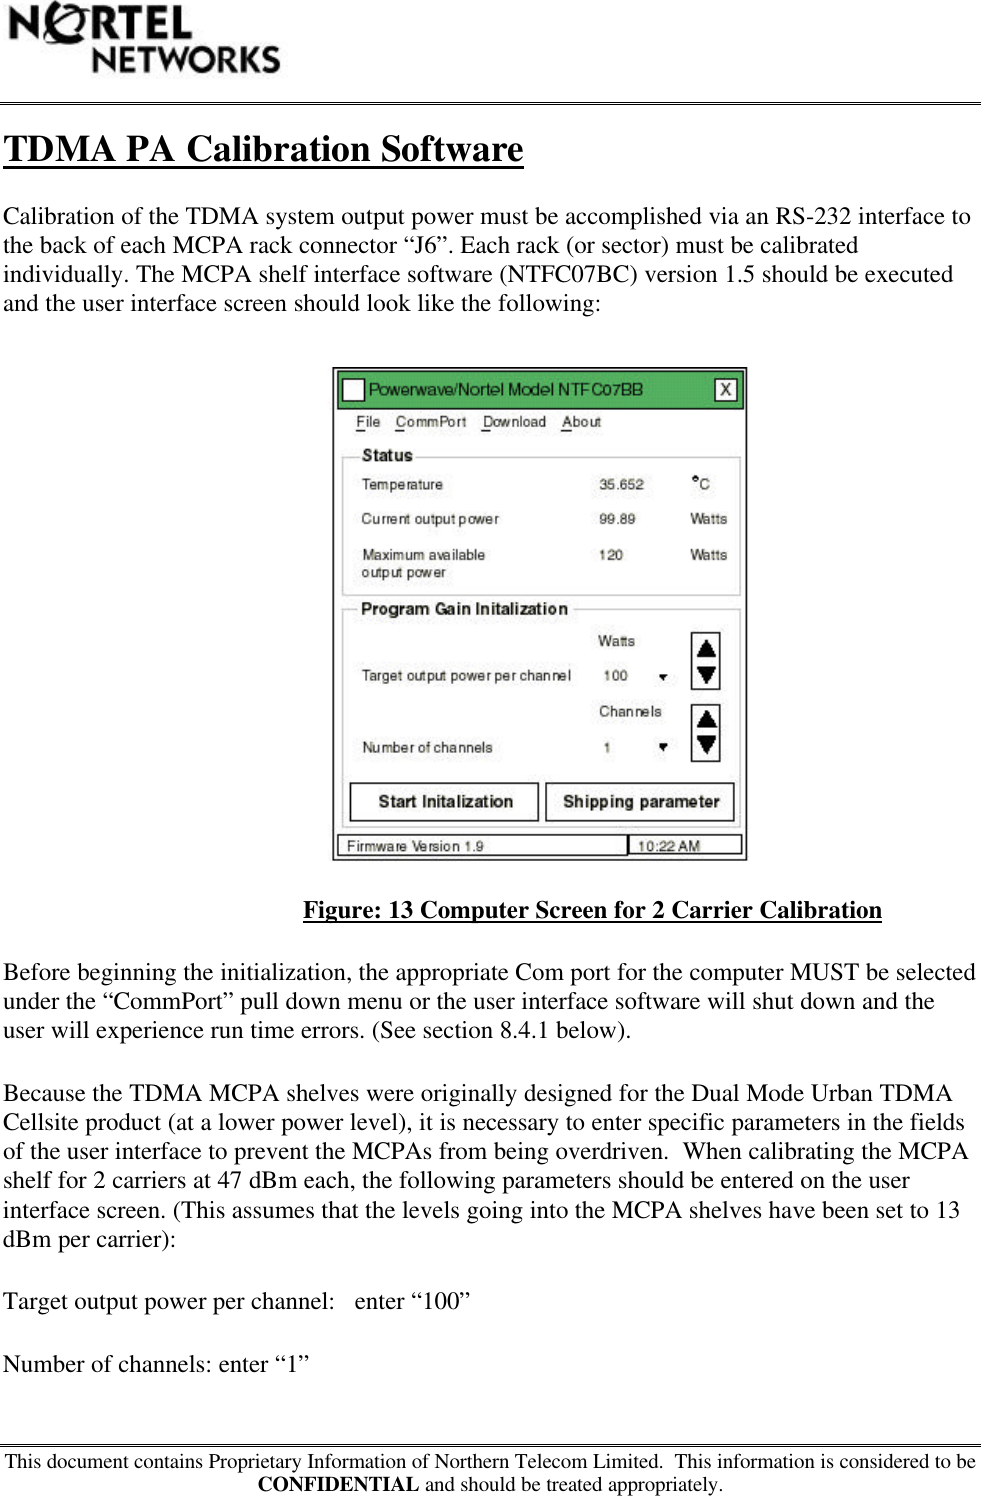 This document contains Proprietary Information of Northern Telecom Limited.  This information is considered to beCONFIDENTIAL and should be treated appropriately.TDMA PA Calibration SoftwareCalibration of the TDMA system output power must be accomplished via an RS-232 interface tothe back of each MCPA rack connector “J6”. Each rack (or sector) must be calibratedindividually. The MCPA shelf interface software (NTFC07BC) version 1.5 should be executedand the user interface screen should look like the following:Figure: 13 Computer Screen for 2 Carrier CalibrationBefore beginning the initialization, the appropriate Com port for the computer MUST be selectedunder the “CommPort” pull down menu or the user interface software will shut down and theuser will experience run time errors. (See section 8.4.1 below).Because the TDMA MCPA shelves were originally designed for the Dual Mode Urban TDMACellsite product (at a lower power level), it is necessary to enter specific parameters in the fieldsof the user interface to prevent the MCPAs from being overdriven.  When calibrating the MCPAshelf for 2 carriers at 47 dBm each, the following parameters should be entered on the userinterface screen. (This assumes that the levels going into the MCPA shelves have been set to 13dBm per carrier):Target output power per channel:   enter “100”Number of channels: enter “1”